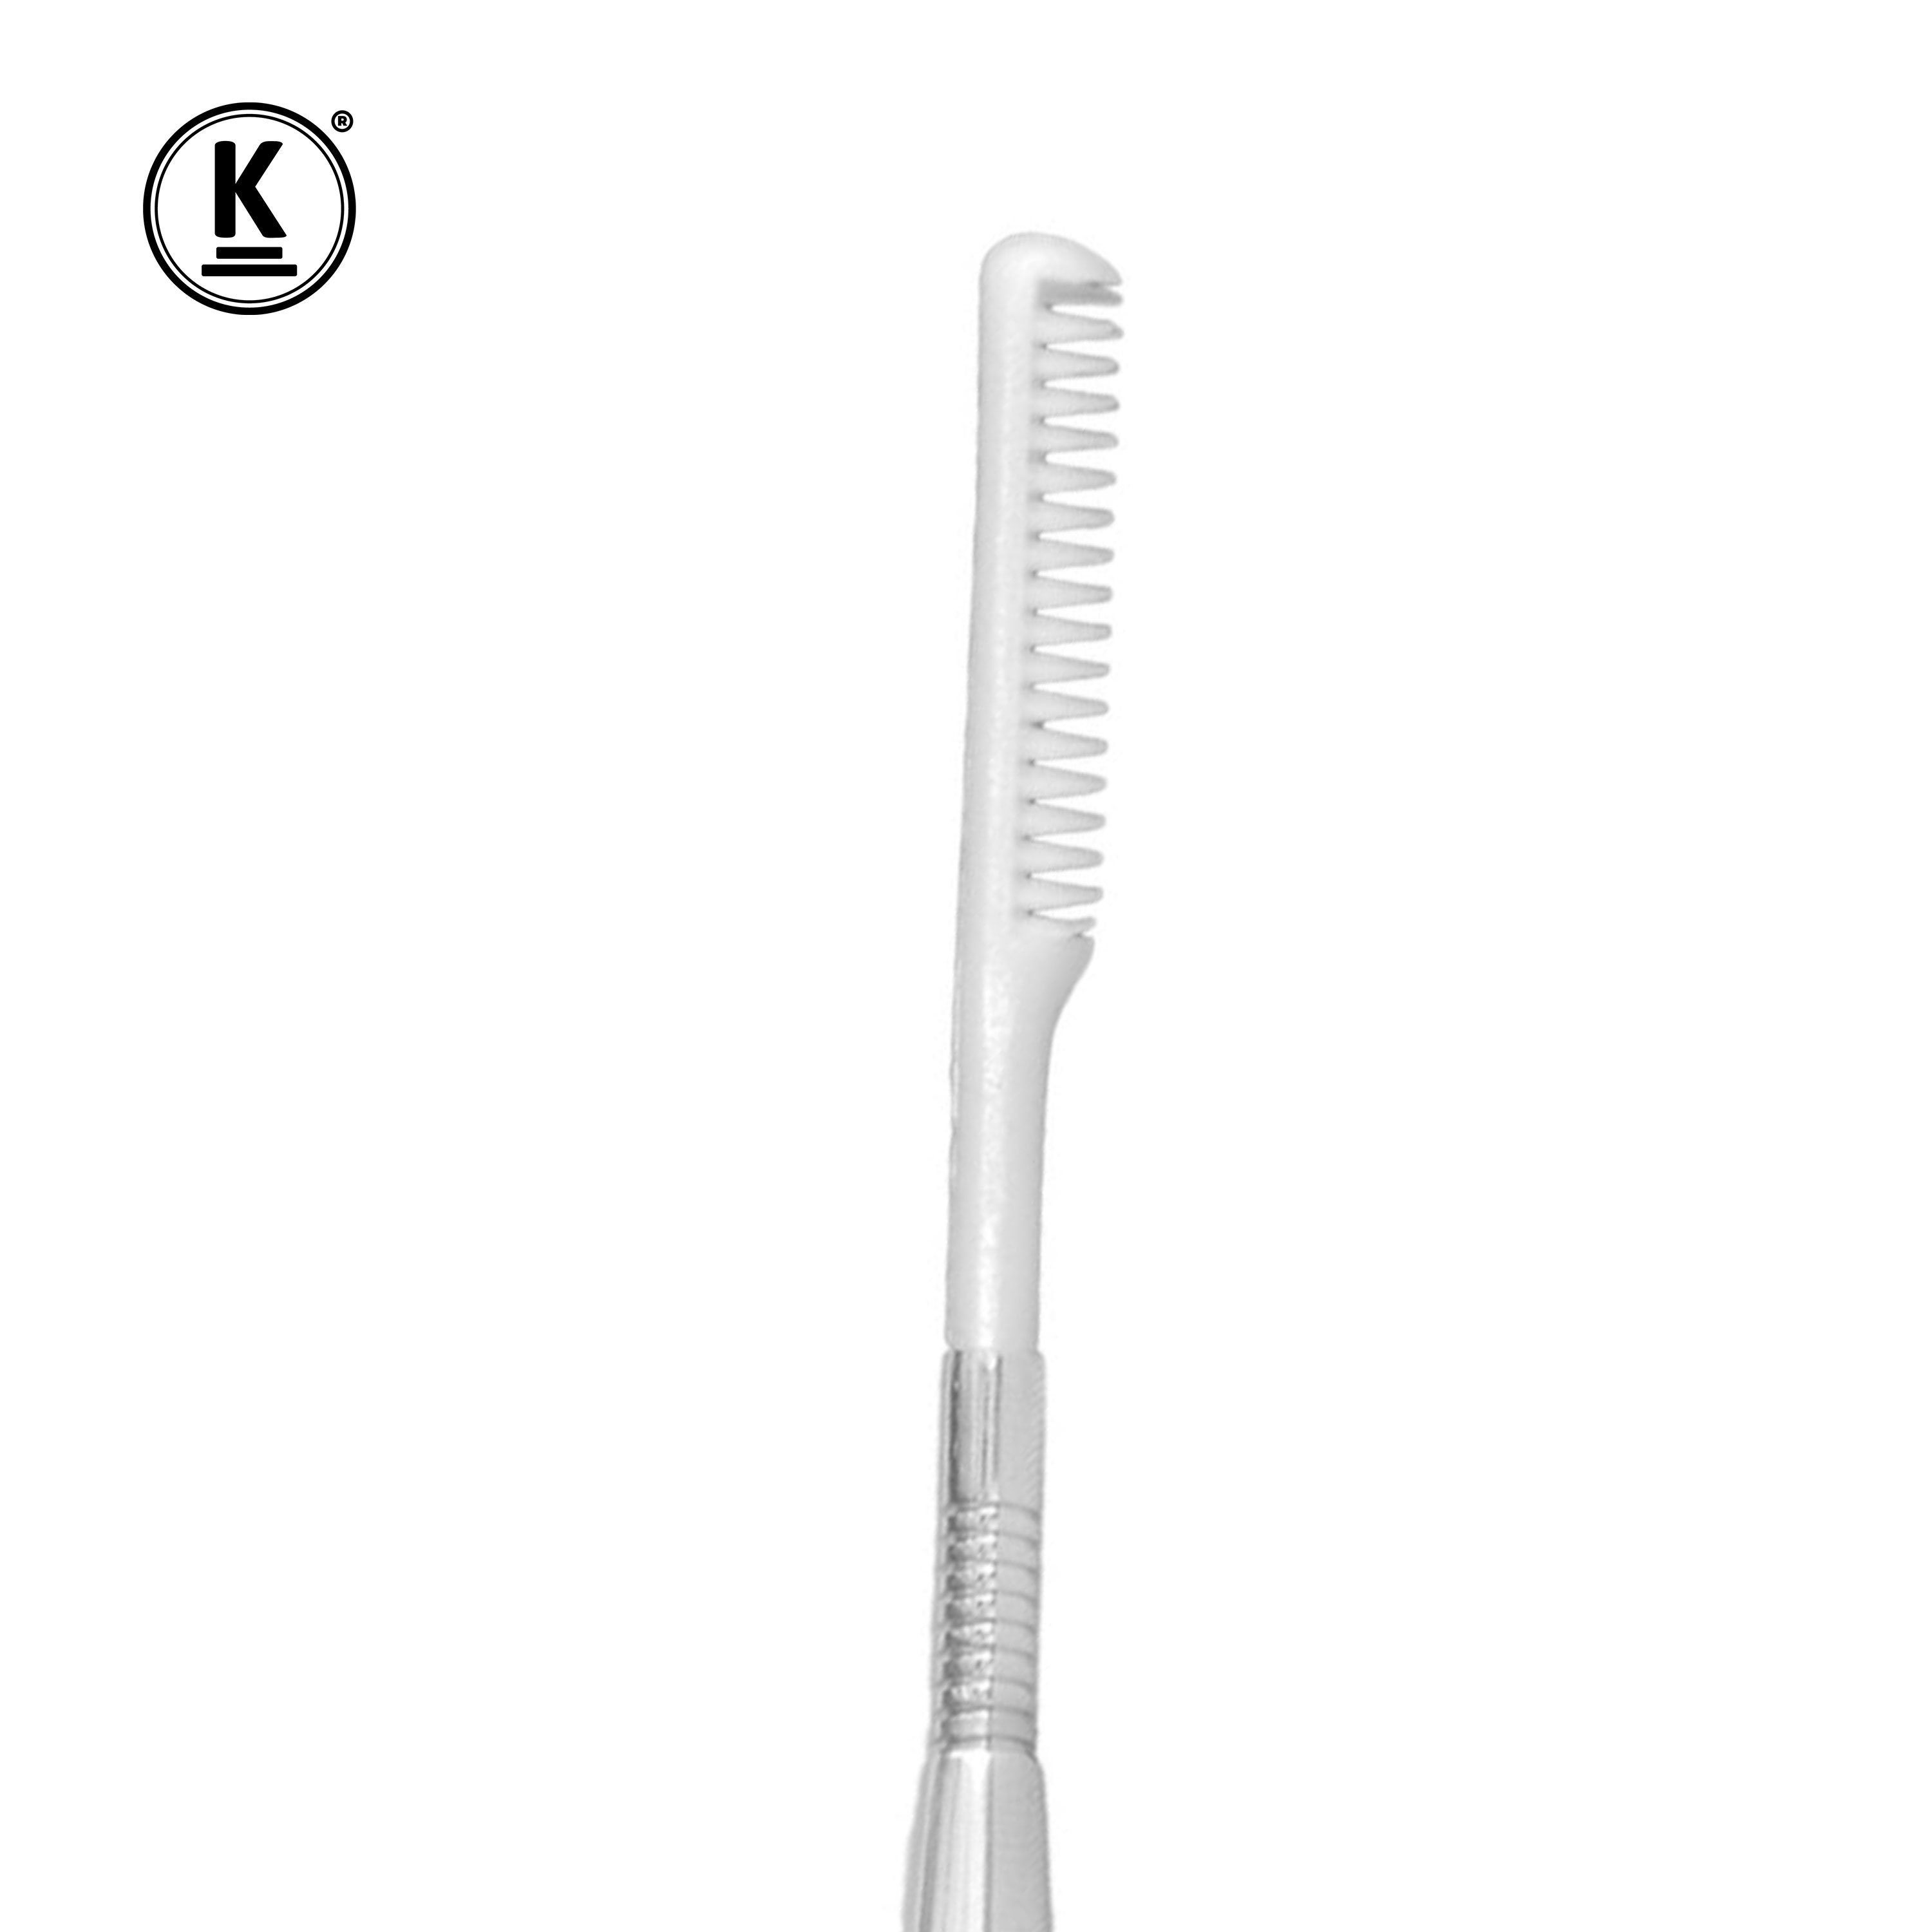 K-Pro Wimpernkamm Seperator Wimpernlifting Kamm & Wimpern Tool - Lifting